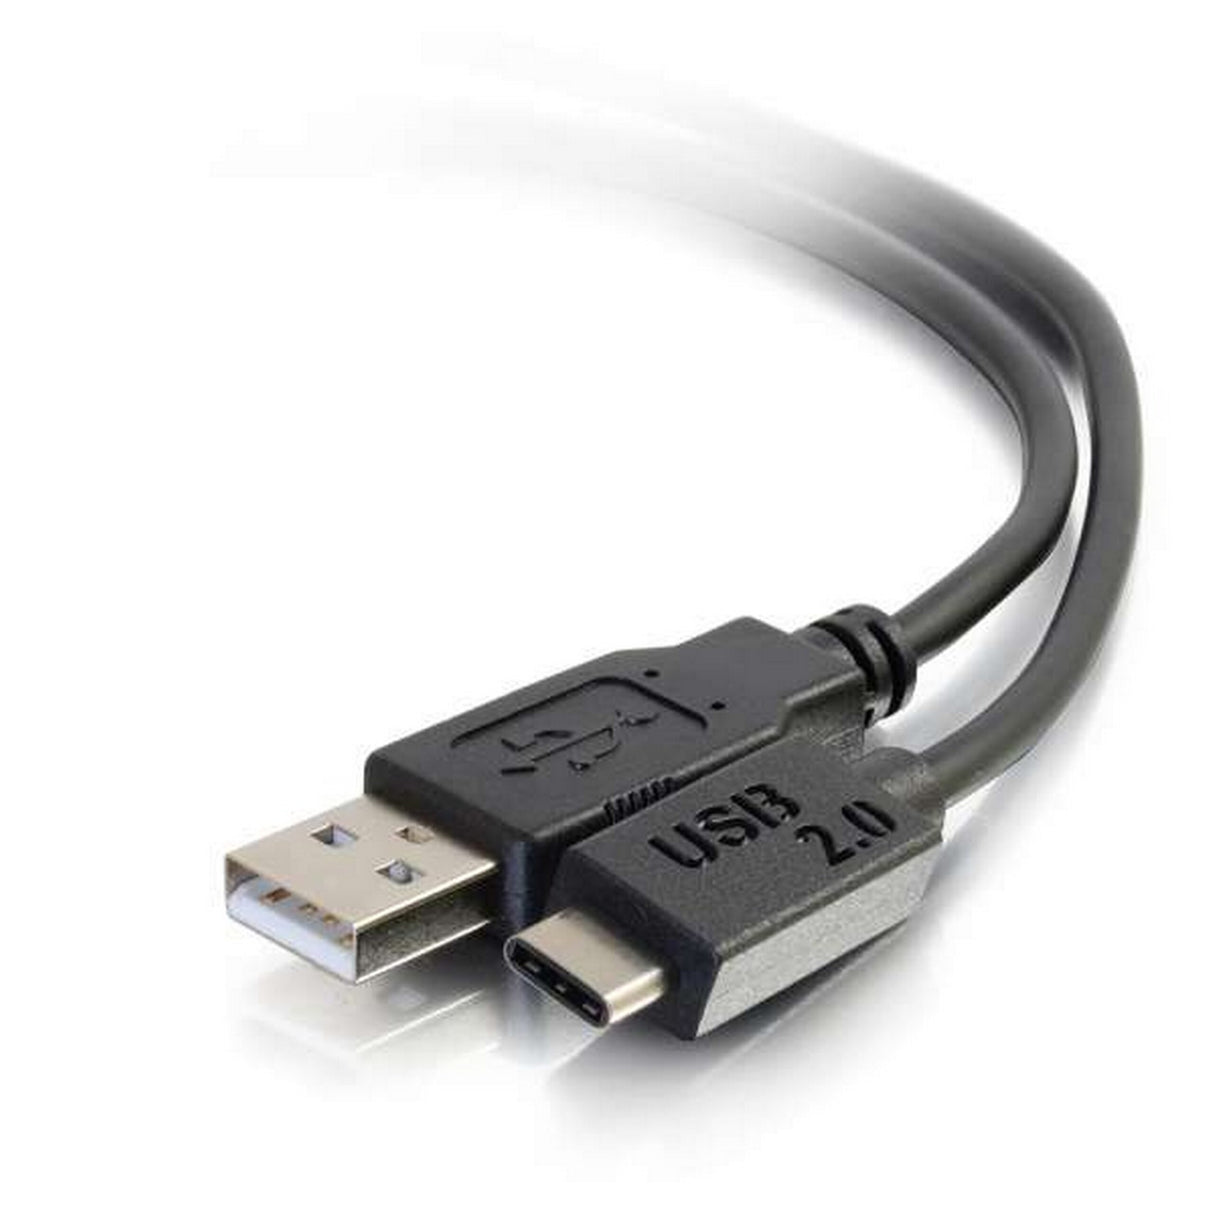 C2G 28872 USB 2.0 USB-C to USB-A Cable M/M, 10 Foot, Black